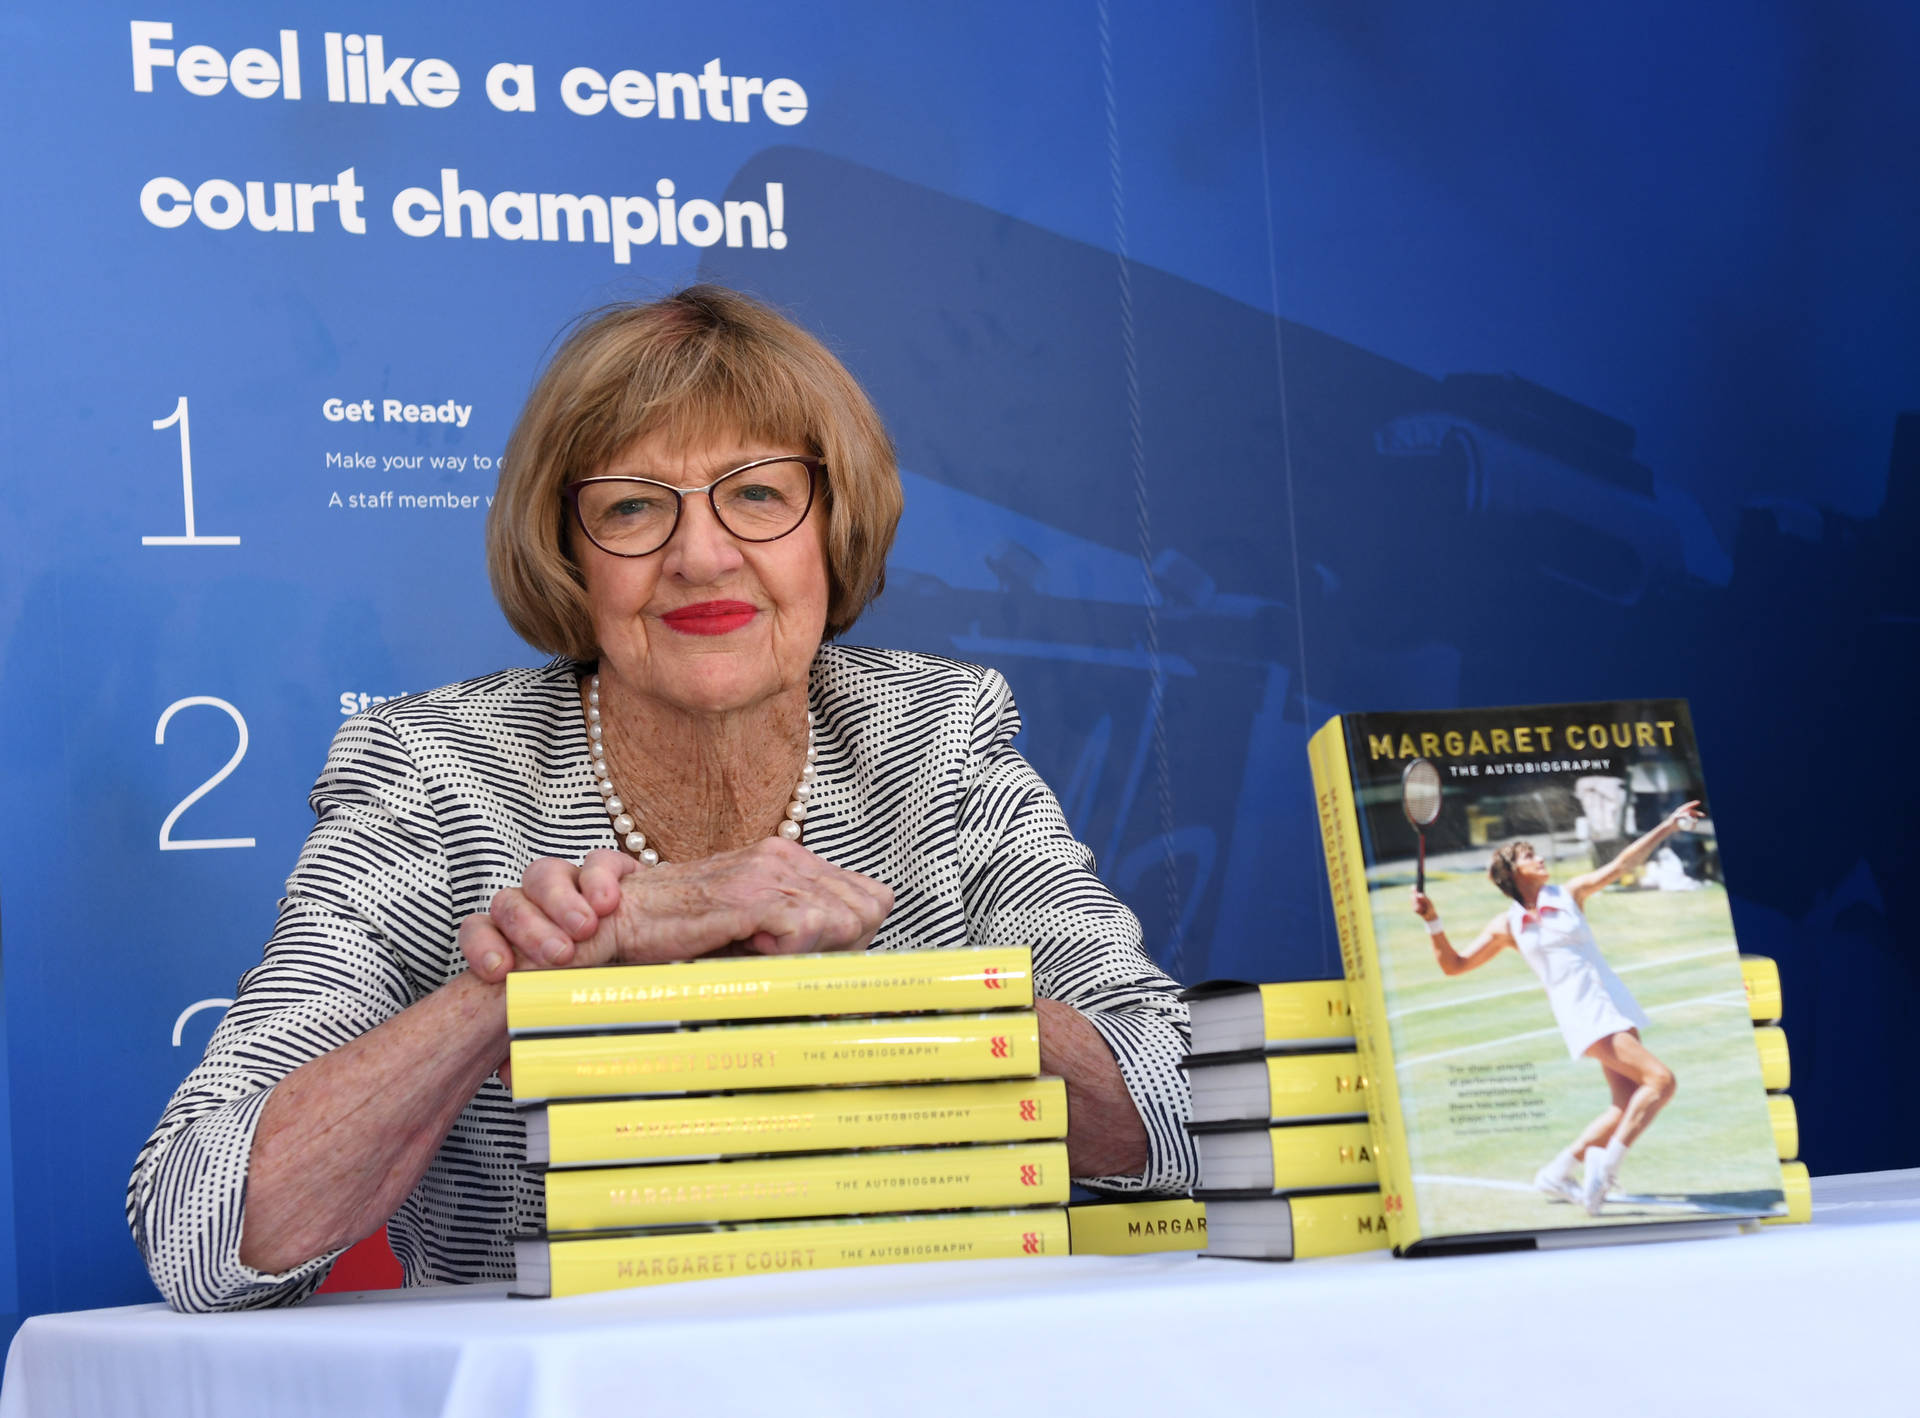 Margaret Court at her Book Launch Event Wallpaper